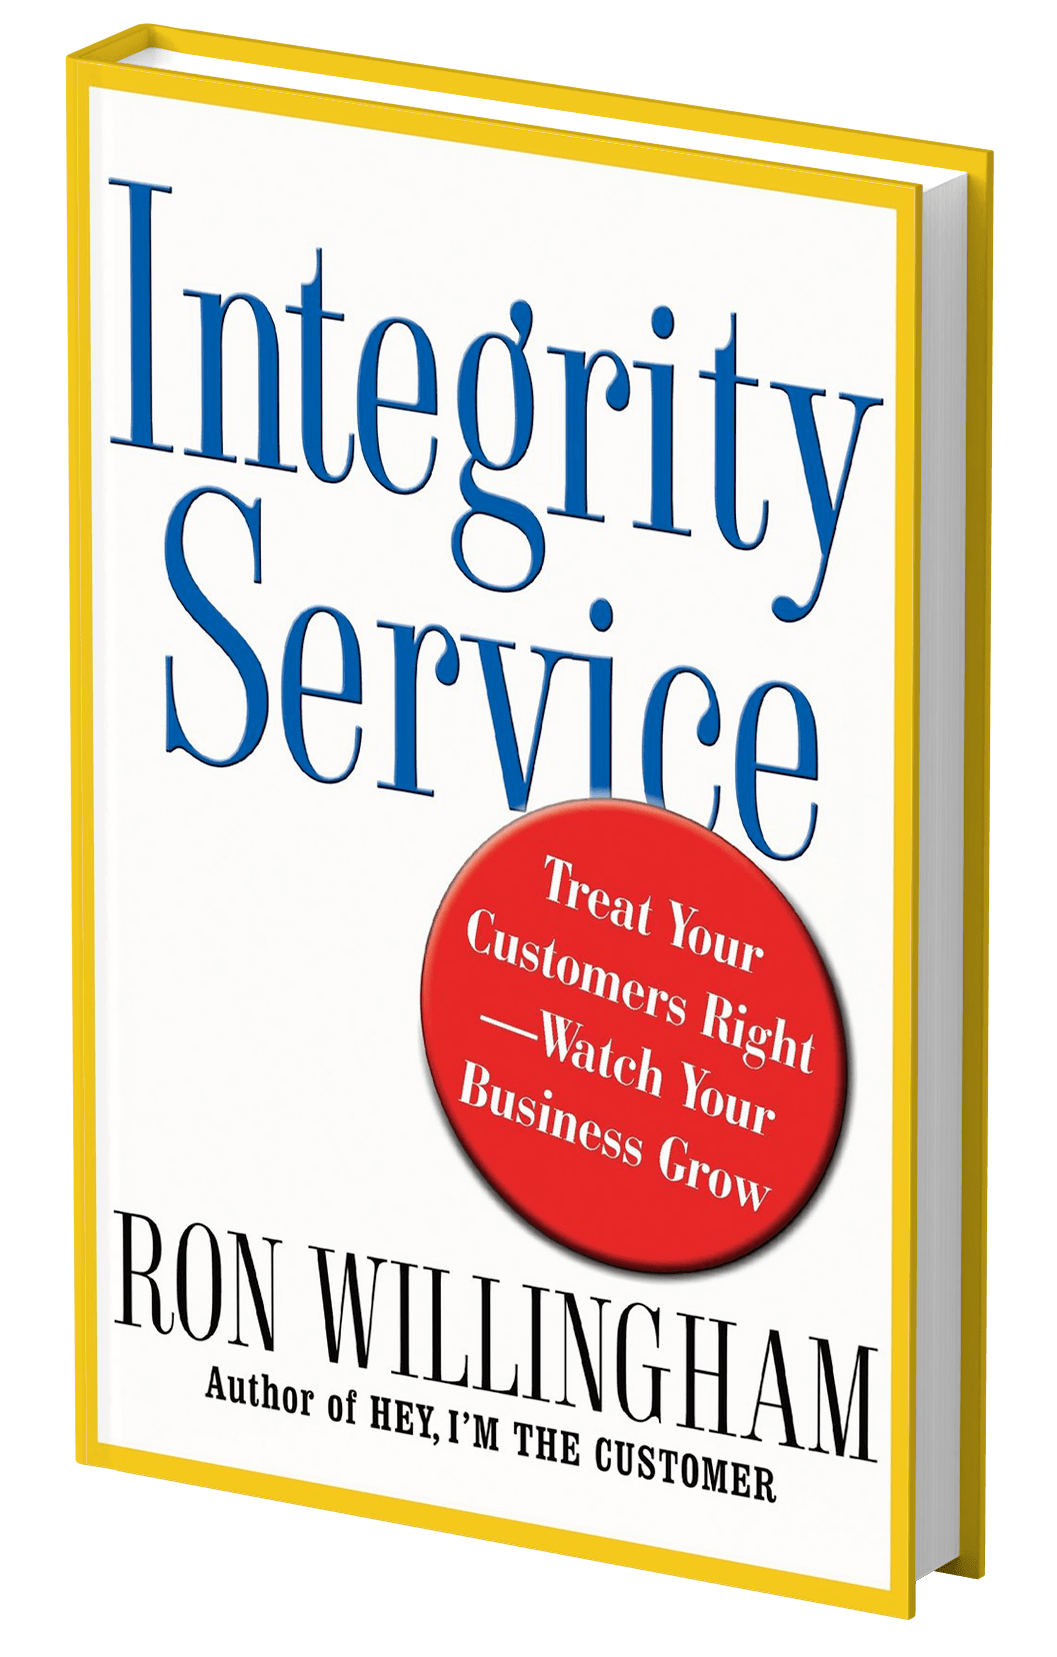 Integrity Service by Ron Willingham